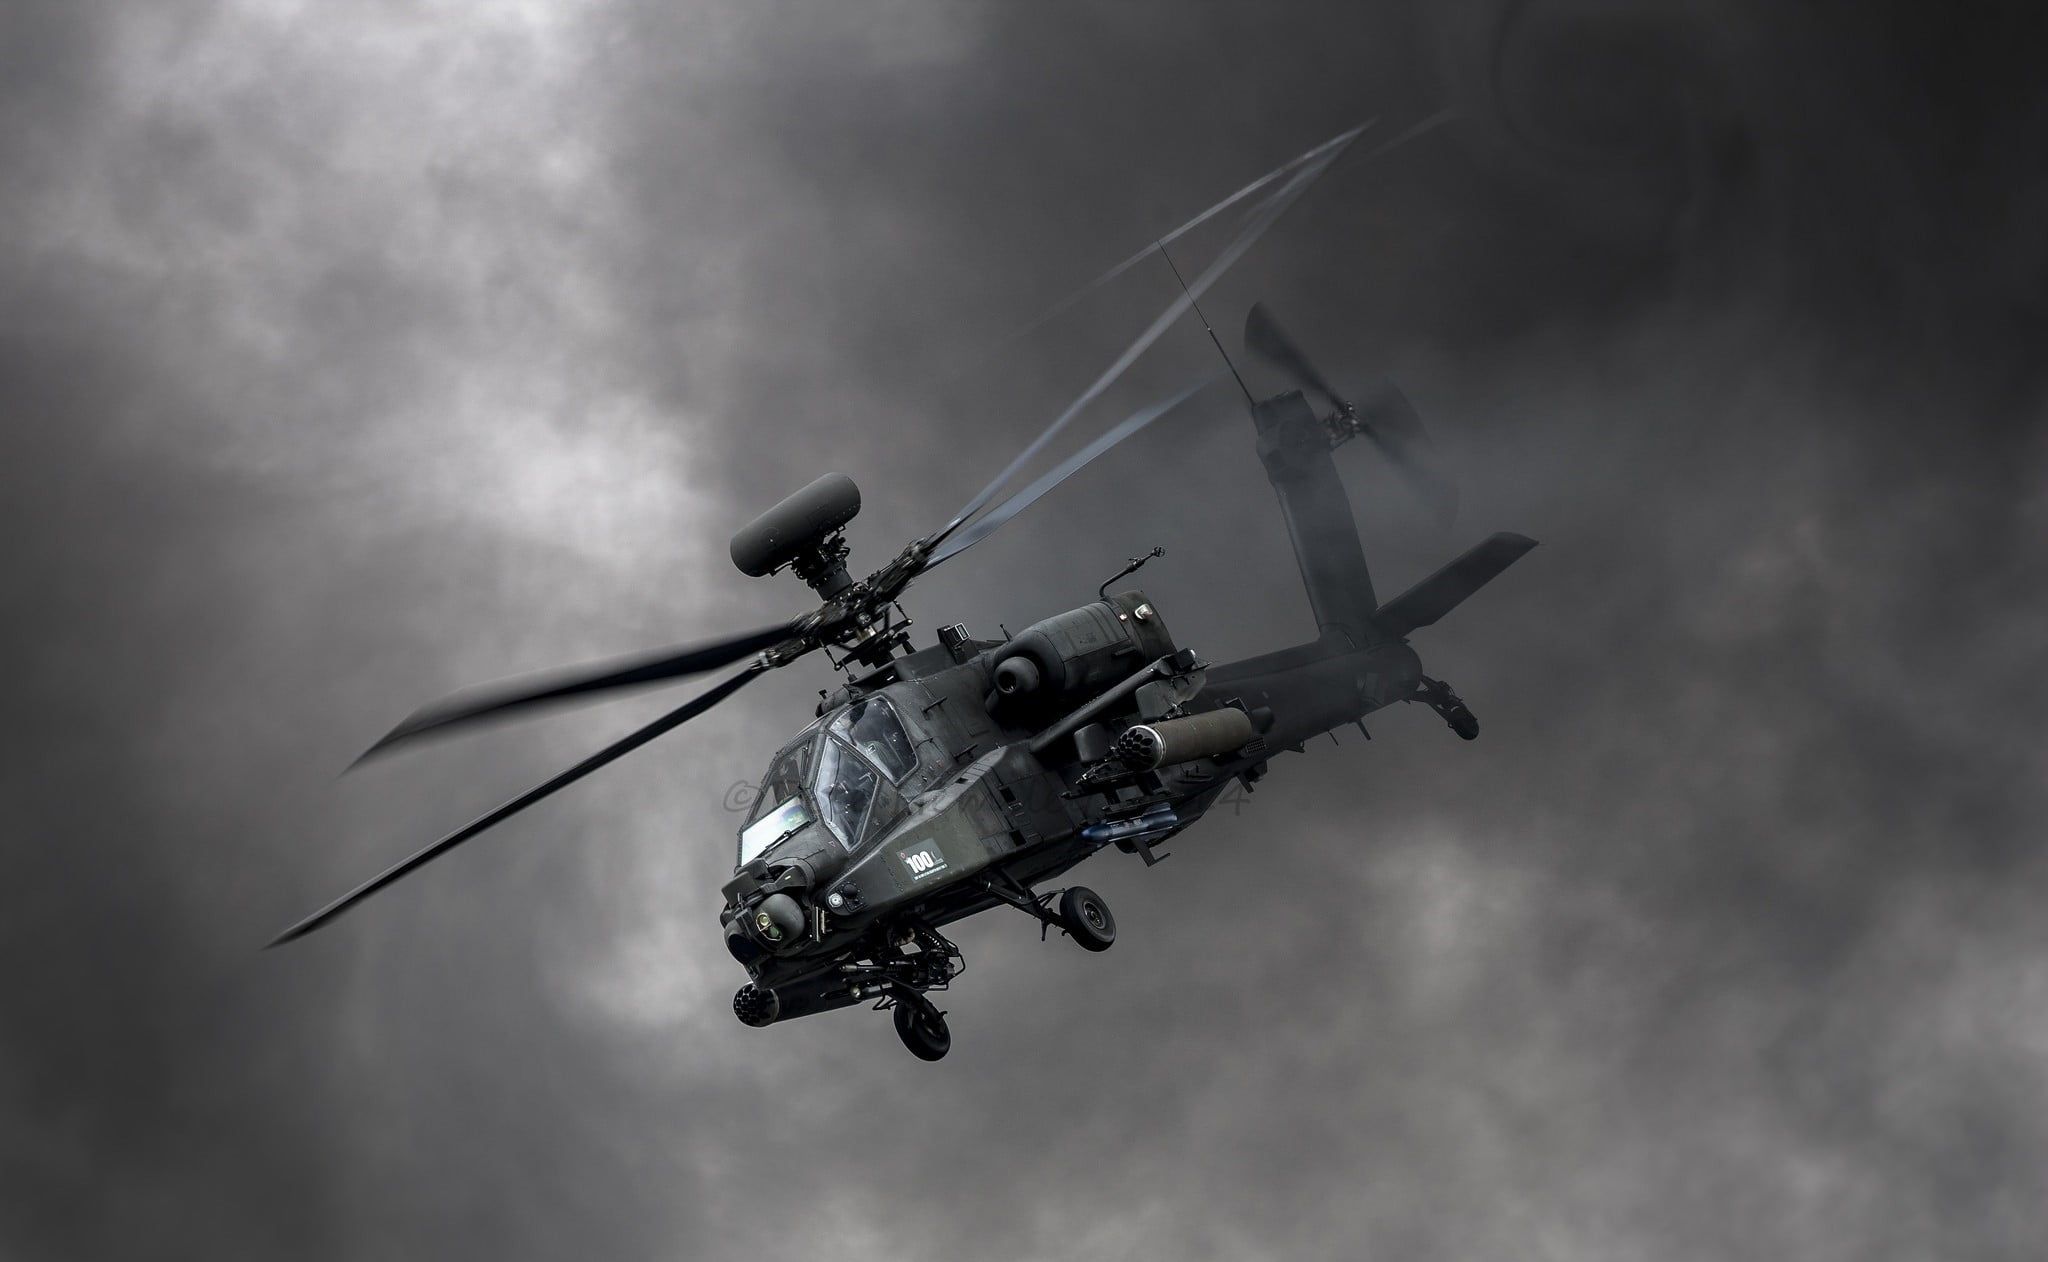 Black Helicopter Boeing Apache AH 64D #military #war #aircraft #helicopters AH 64 Apache #vehicle P #wallpaper #hdwall. Black Helicopters, Helicopter, Apache